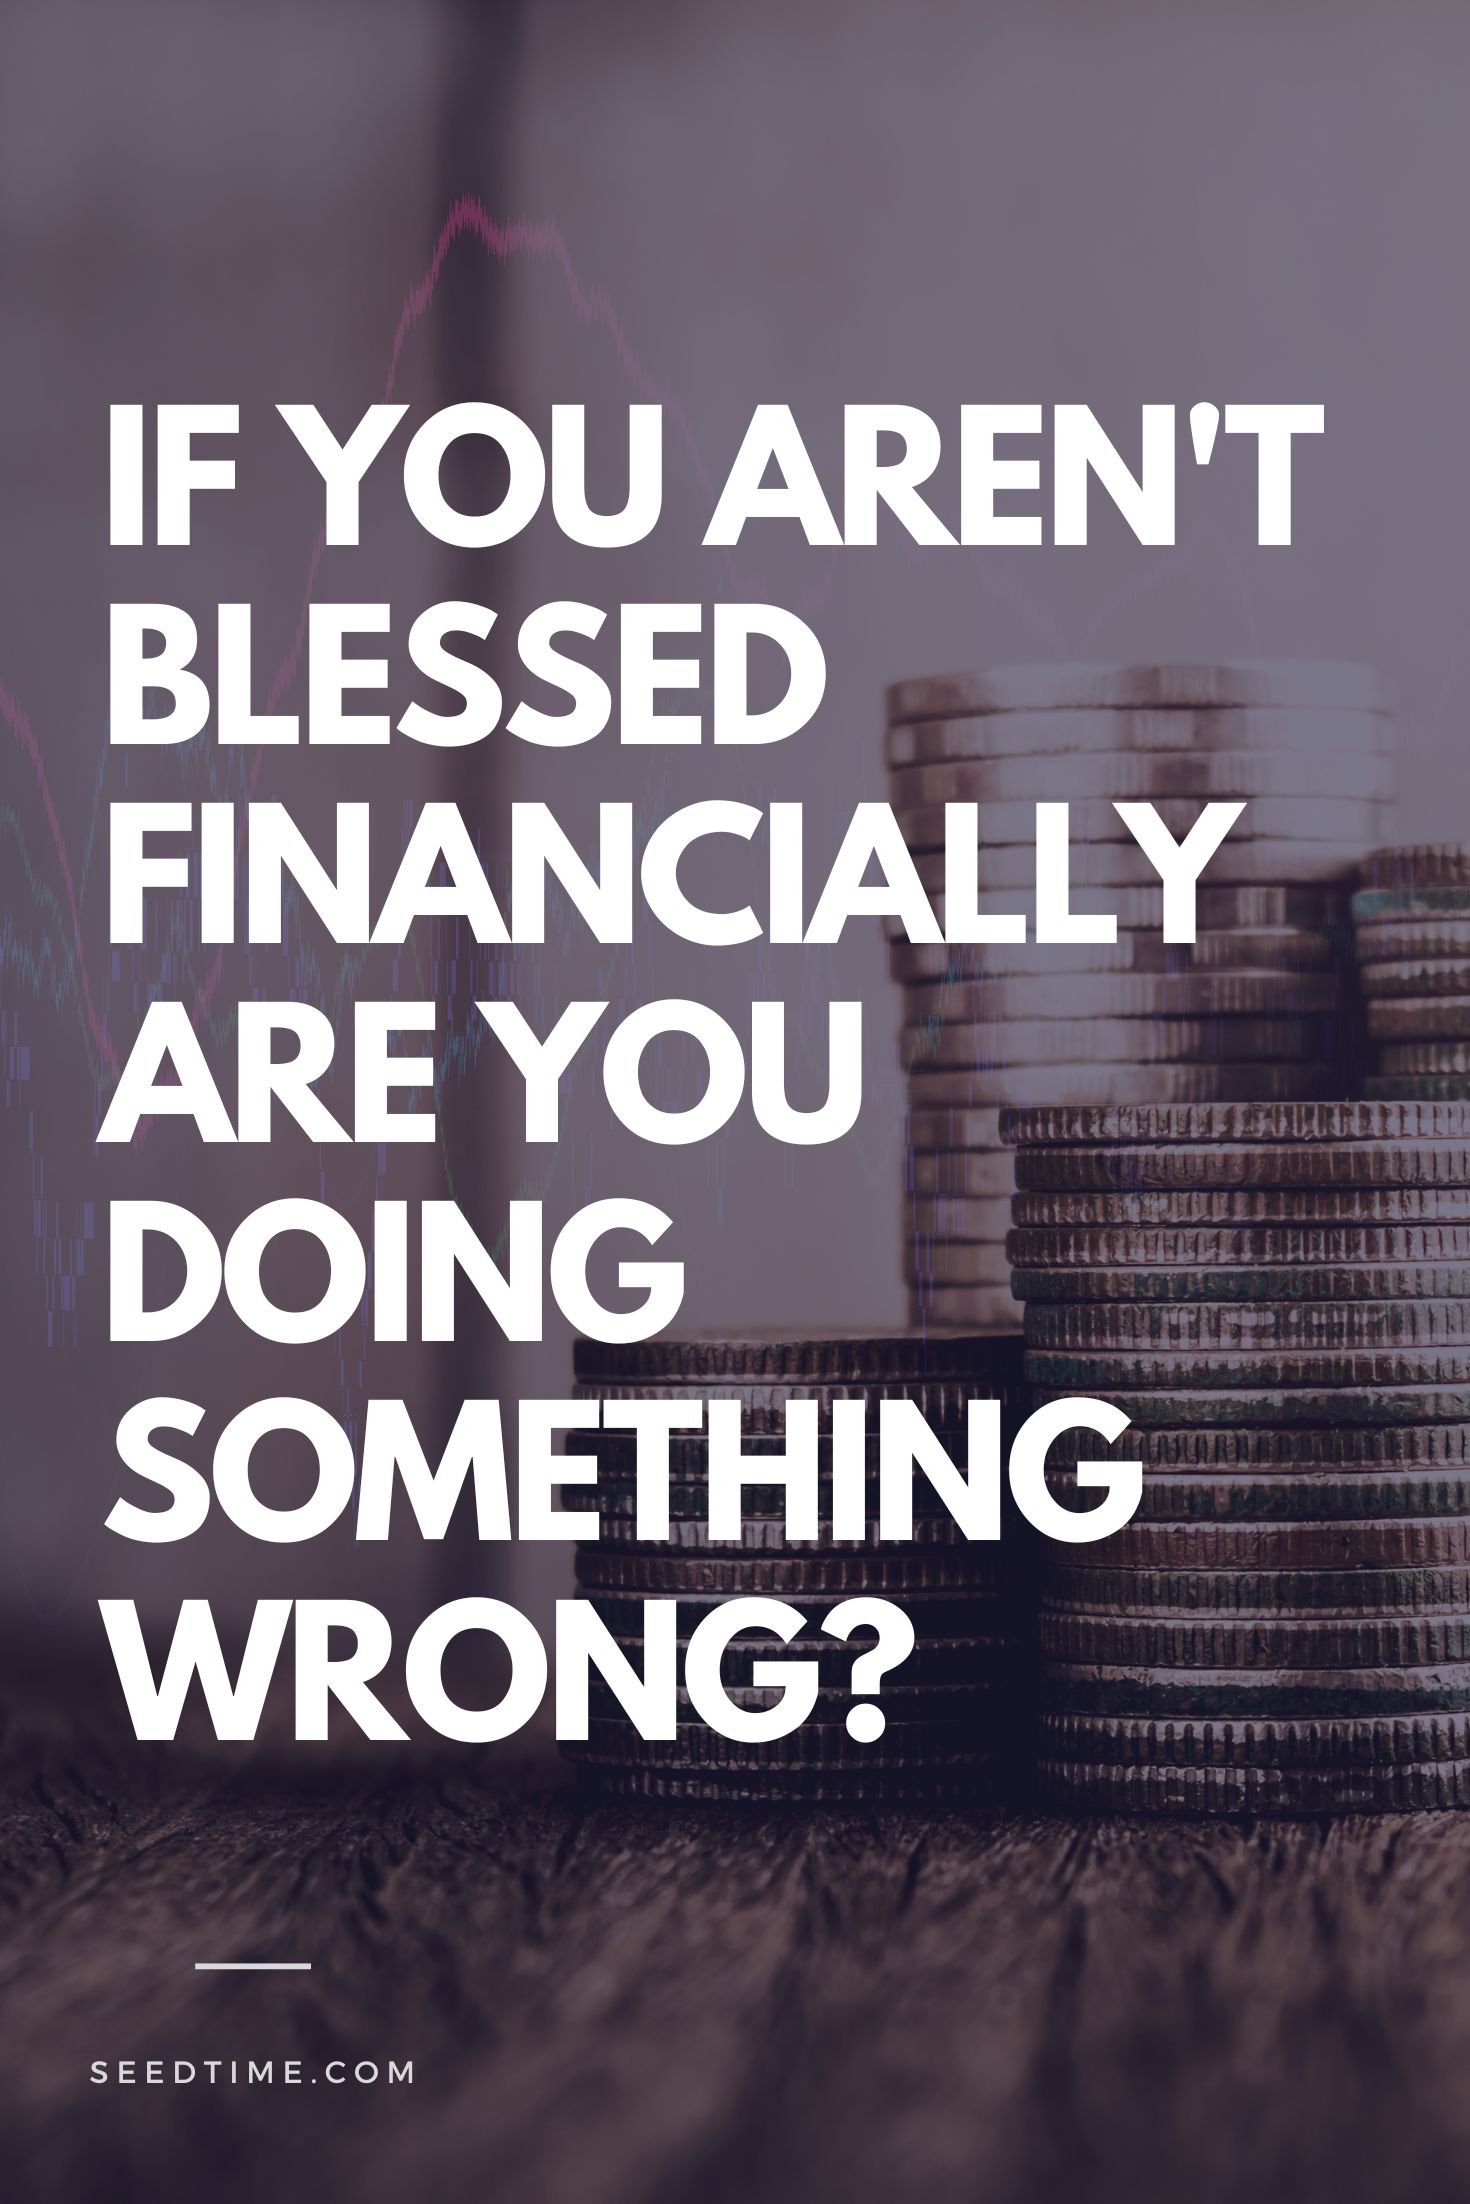 If you arent blessed financially are you doing something wrong